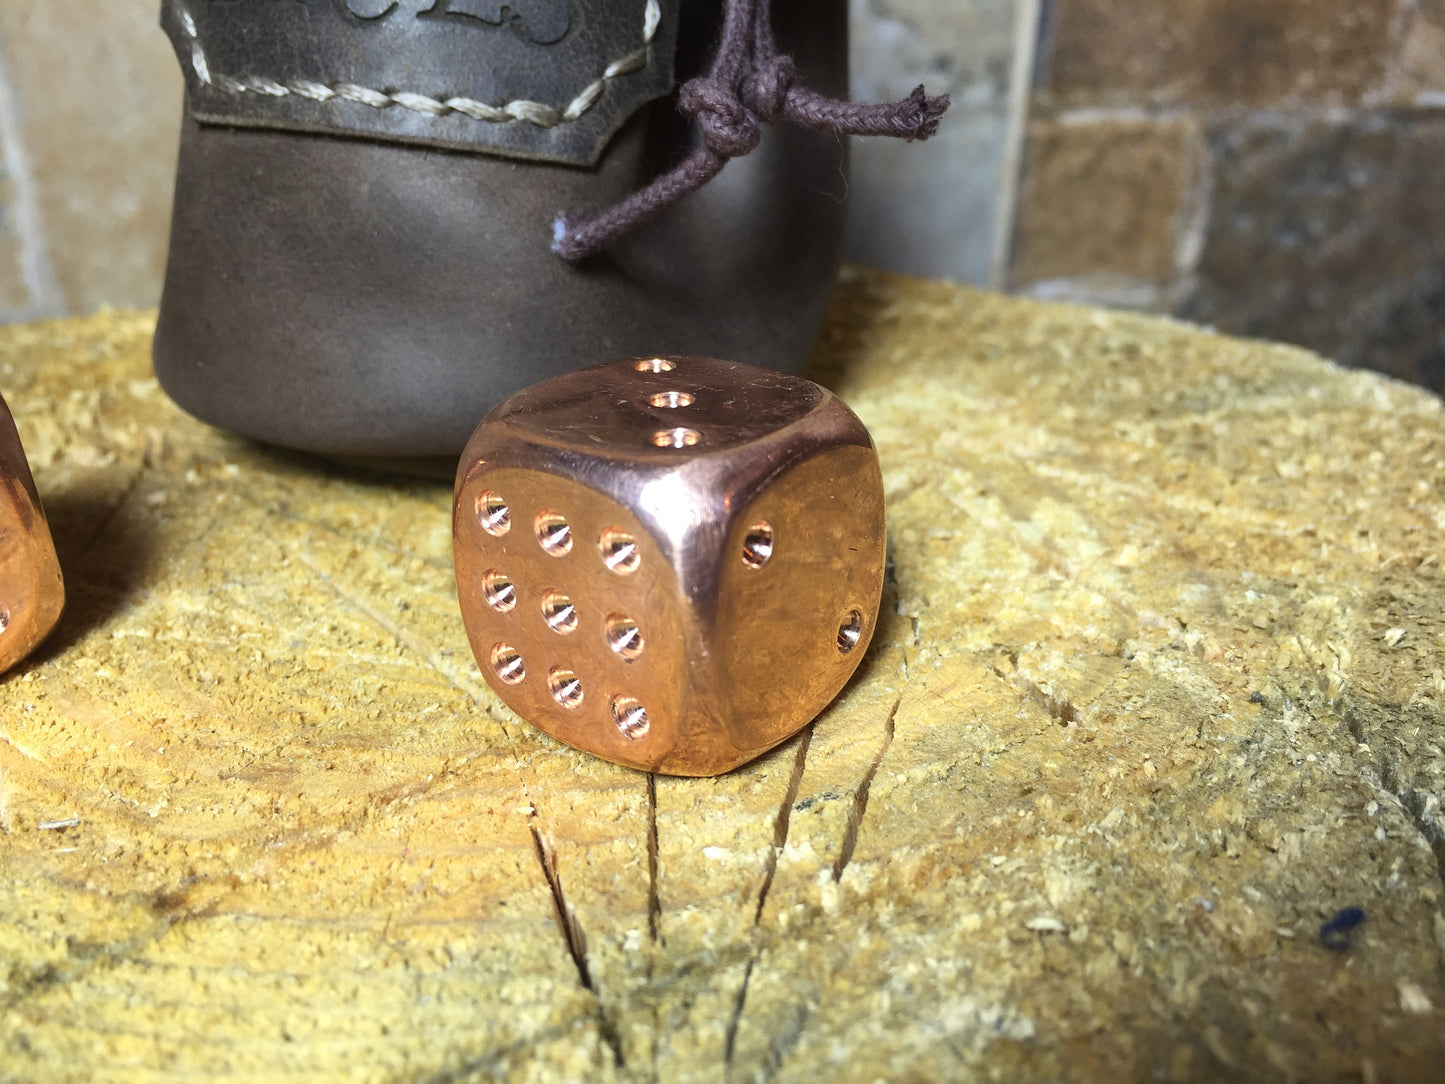 Copper dice set in a leather bag, metal dice, gambling dice, gaming dice, custom dice, iron dice,groomsman gift,steel dice,role playing game